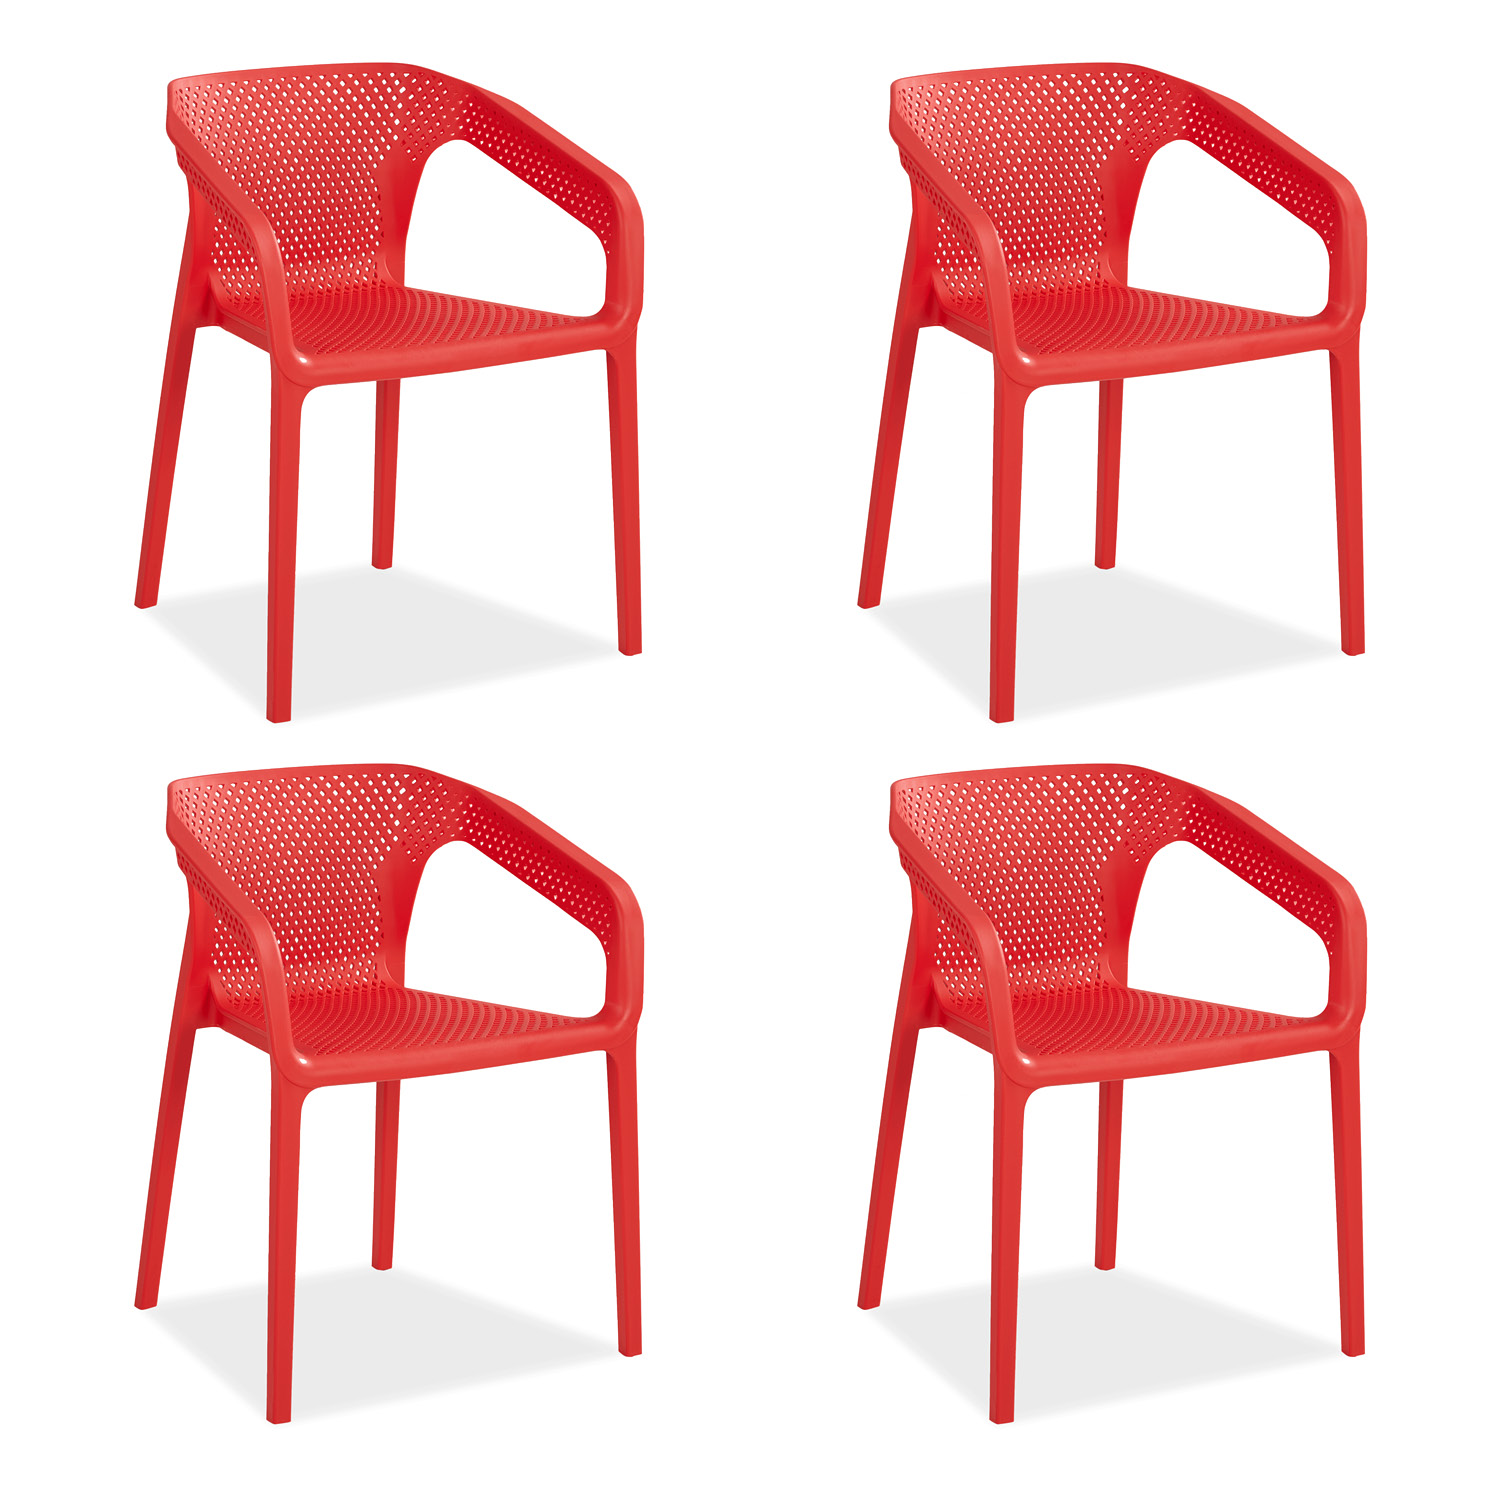 Set of 4 Garden chair with armrests Camping chairs Red Outdoor chairs Plastic Egg chair Lounger chairs Stacking chairs